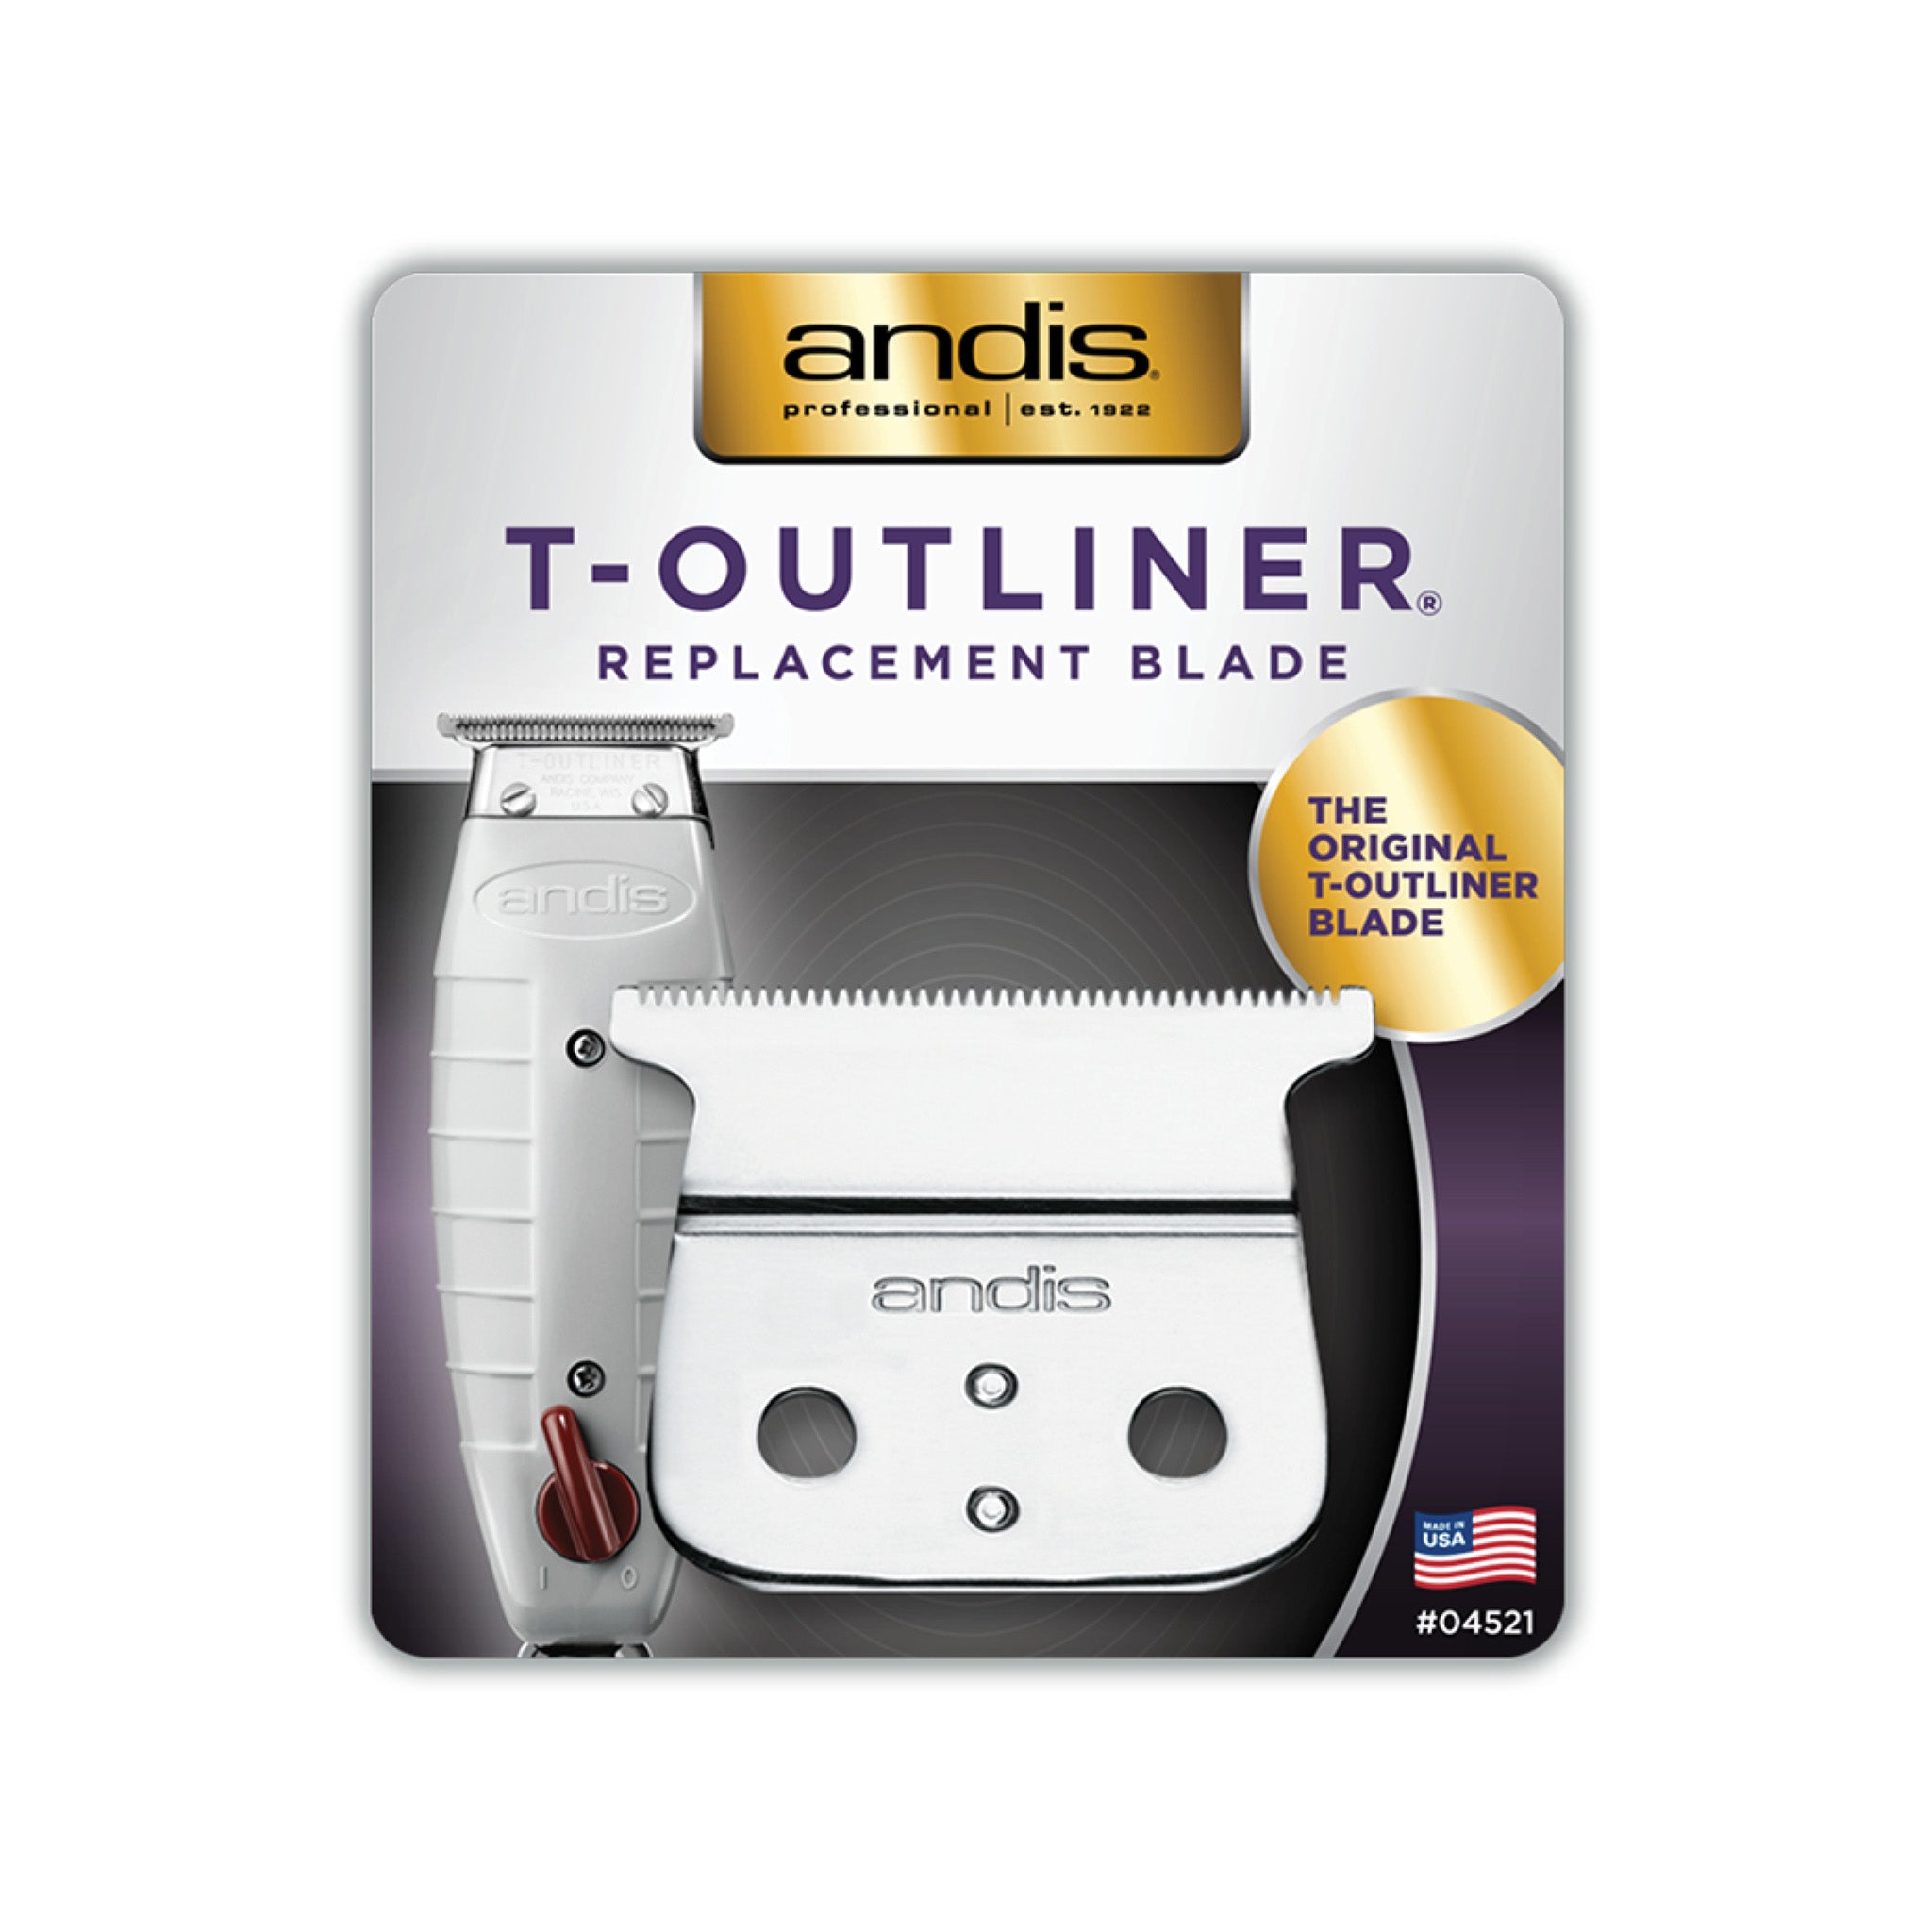 Andis T-Outliner Replacement Blade Original